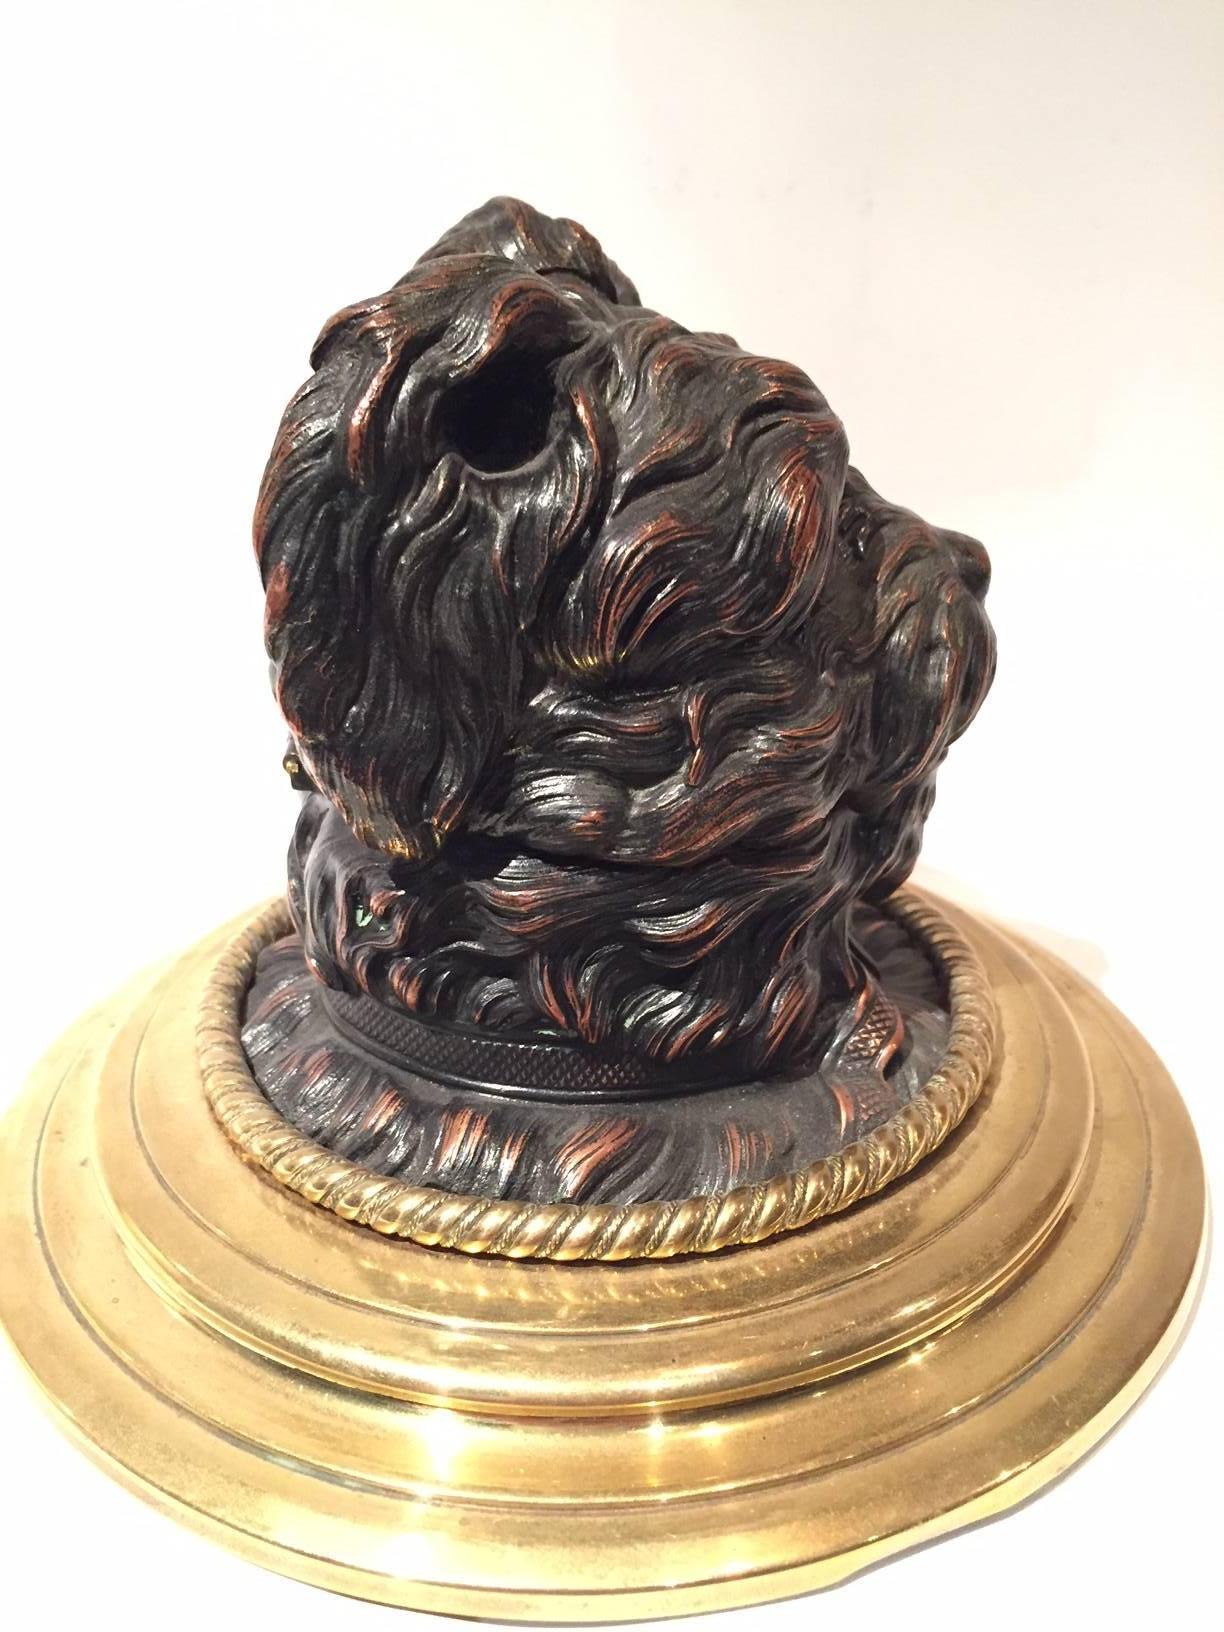 19th Century Late 19th or Early 20th Century Yorkshire Terrier Dog Bronze French Inkwell